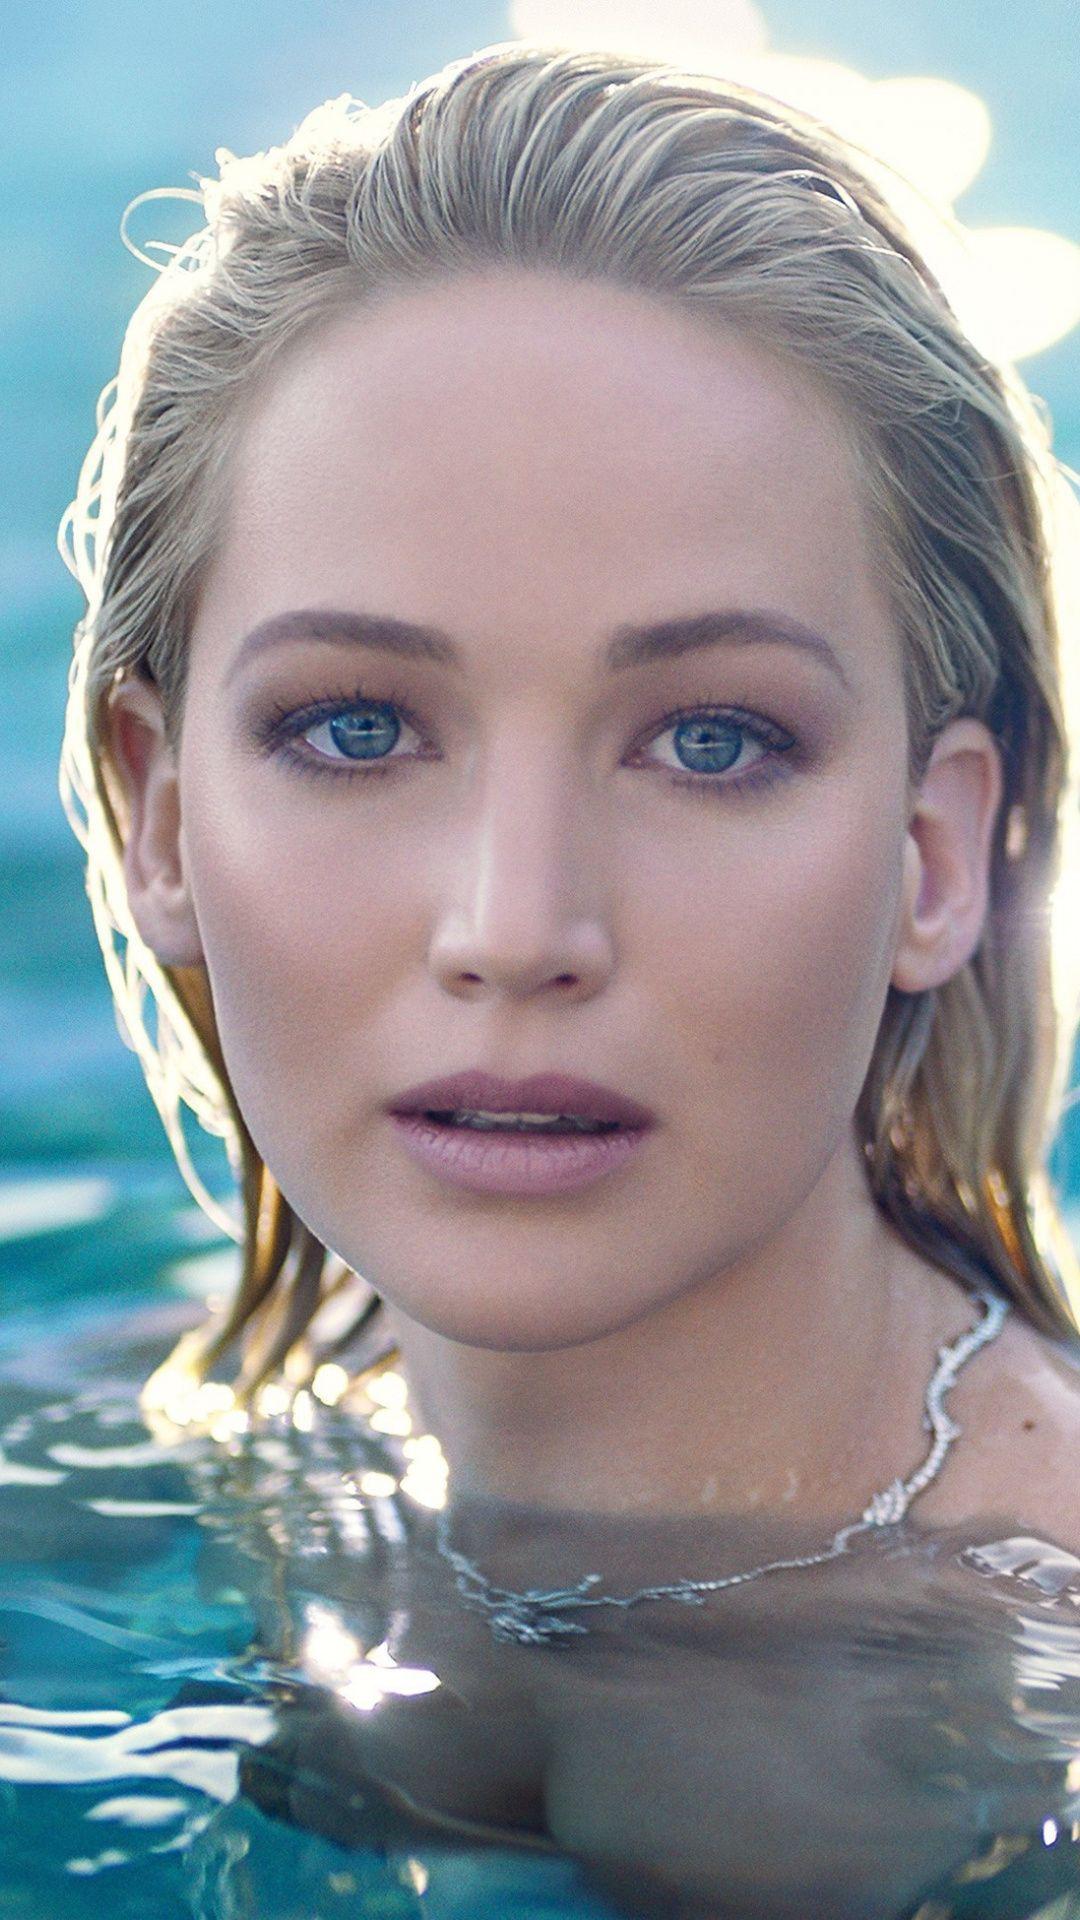 Jennifer Lawrence iPhone 8 wallpaper with high-resolution 1080x1920 pixel. You can use this wallpaper for your iPhone 5, 6, 7, 8, X, XS, XR backgrounds, Mobile Screensaver, or iPad Lock Screen - Jennifer Lawrence